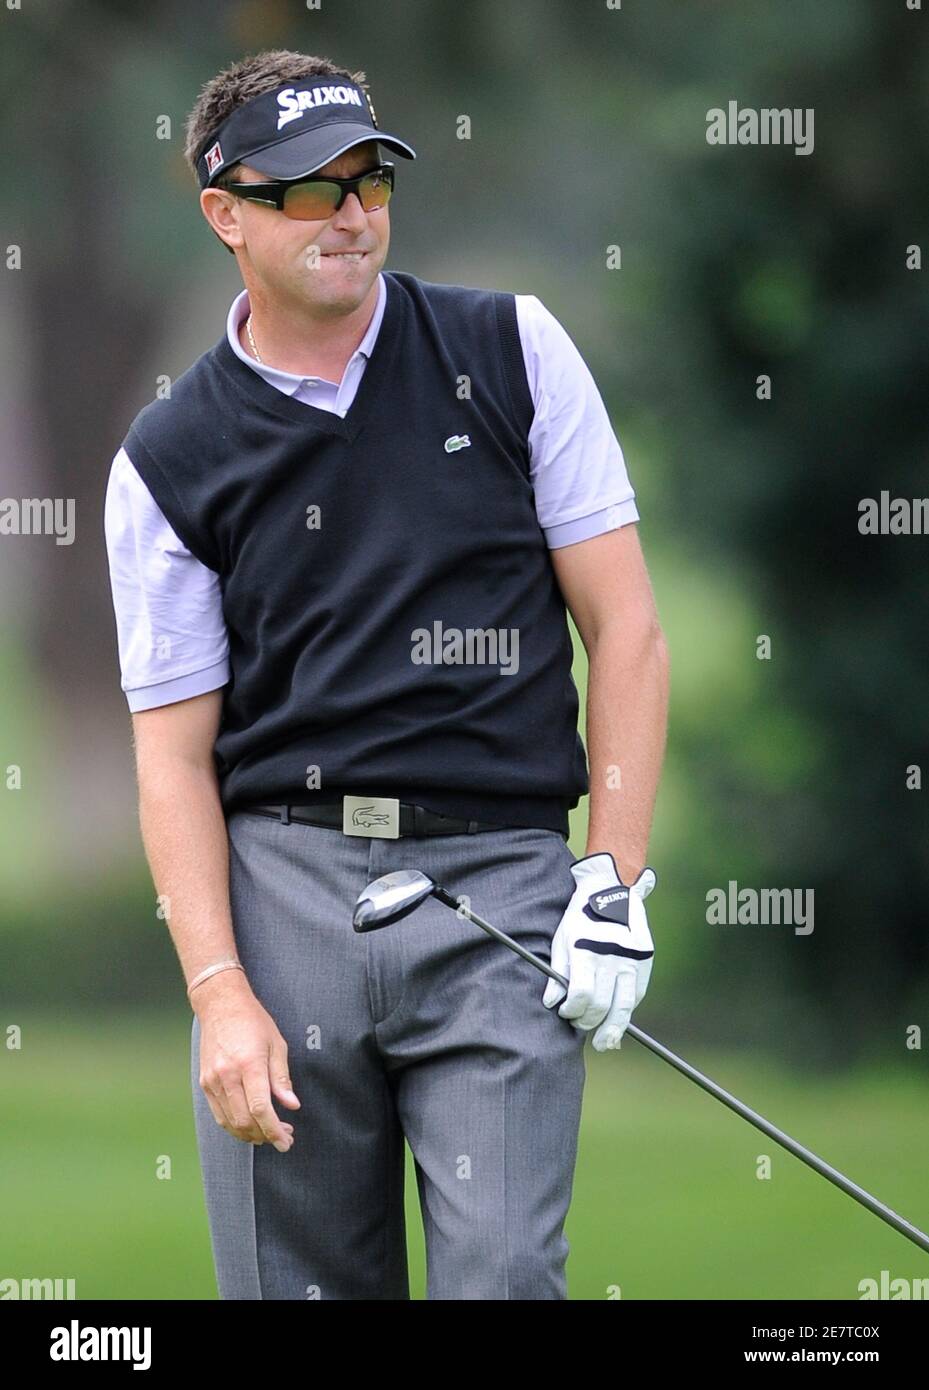 Golfer Robert Allenby of Australia reacts to his shot on the eleventh fairway during the third round of the Northern Trust Open golf tournament in the Pacific Palisades area of Los Angeles February 21, 2009. REUTERS/Gus Ruelas (UNITED STATES) Stock Photo